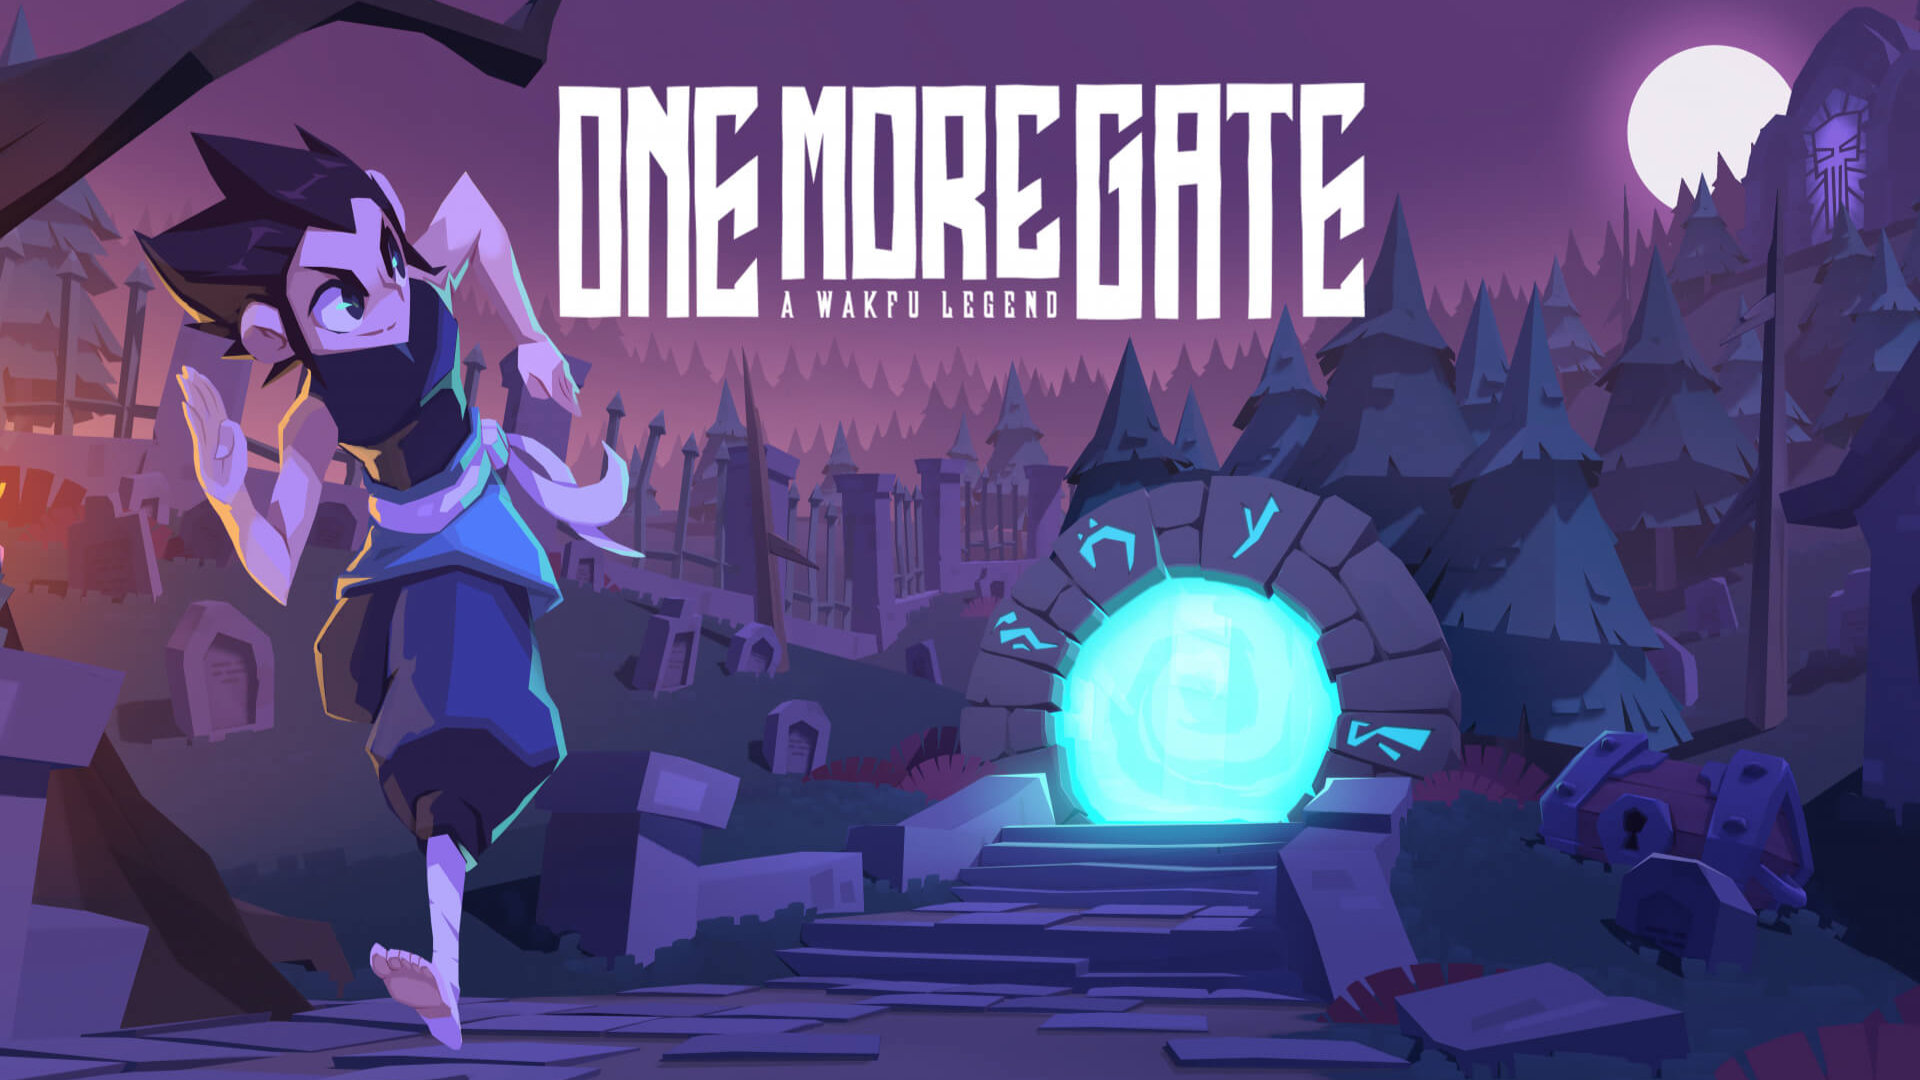 Free Steam keys: win a copy of One More Gate!